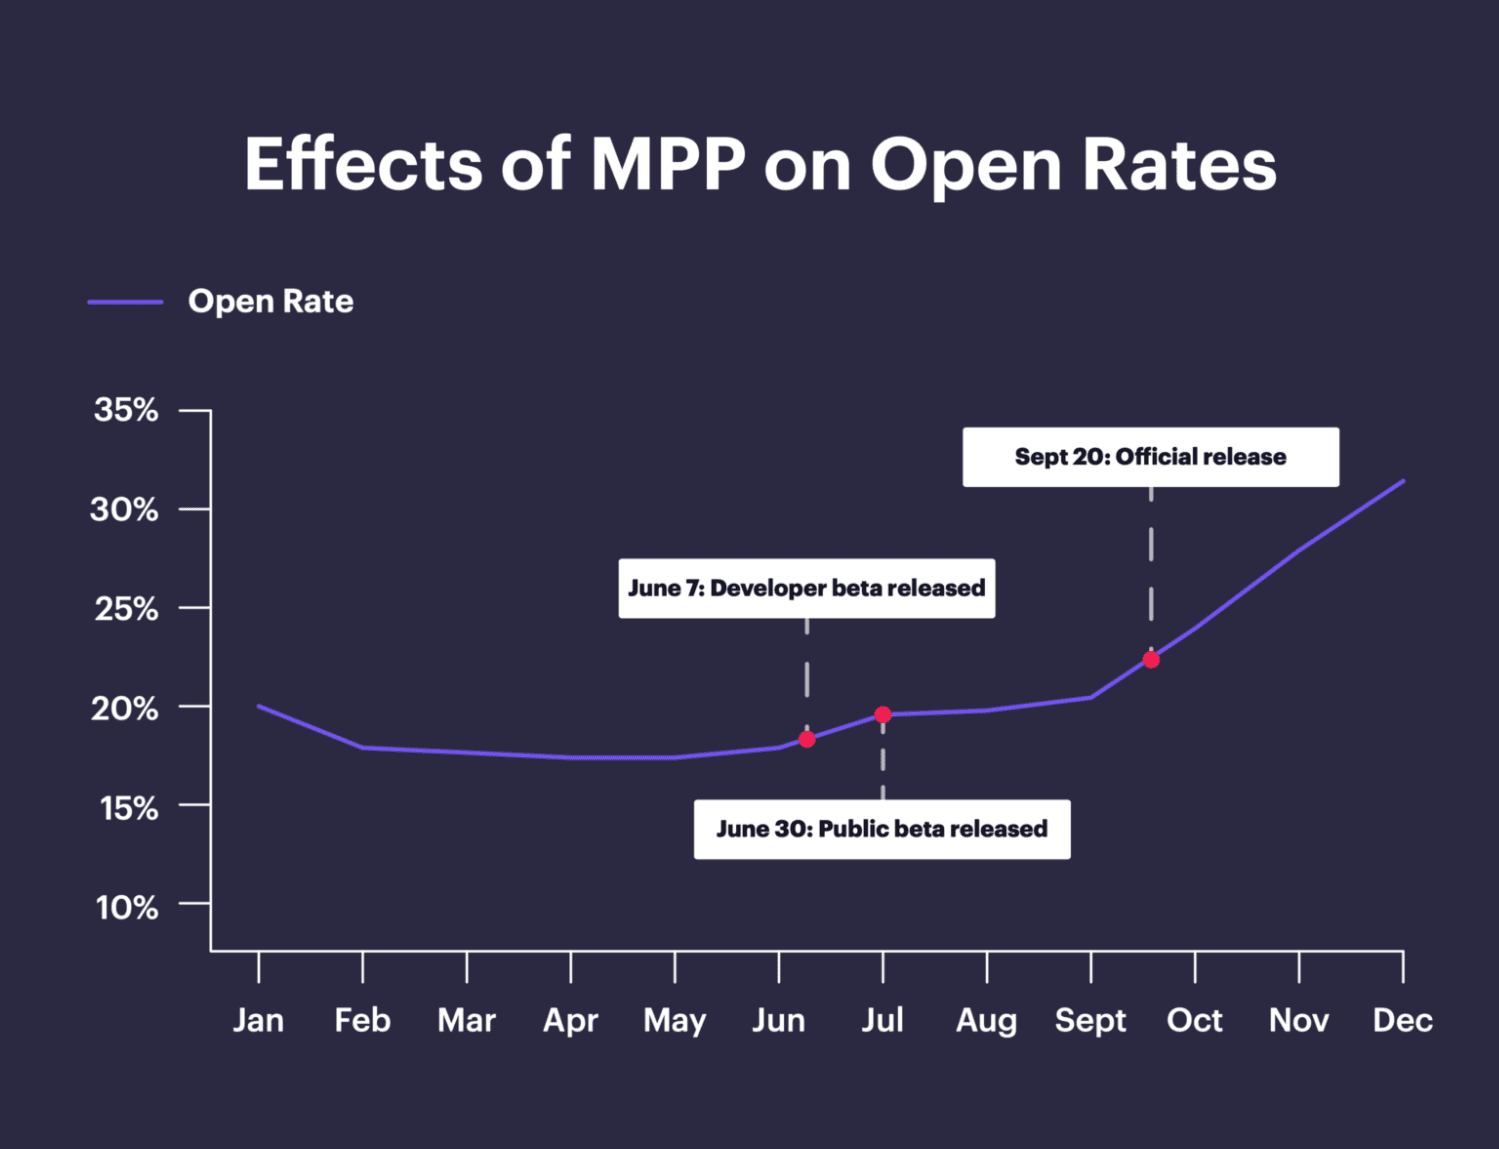 Line graph depicting the effect of Apple's Mail Privacy Protection update increasing open rates starting with its beta release in July 2021, increasing sharply on September 30th when it was officially released.